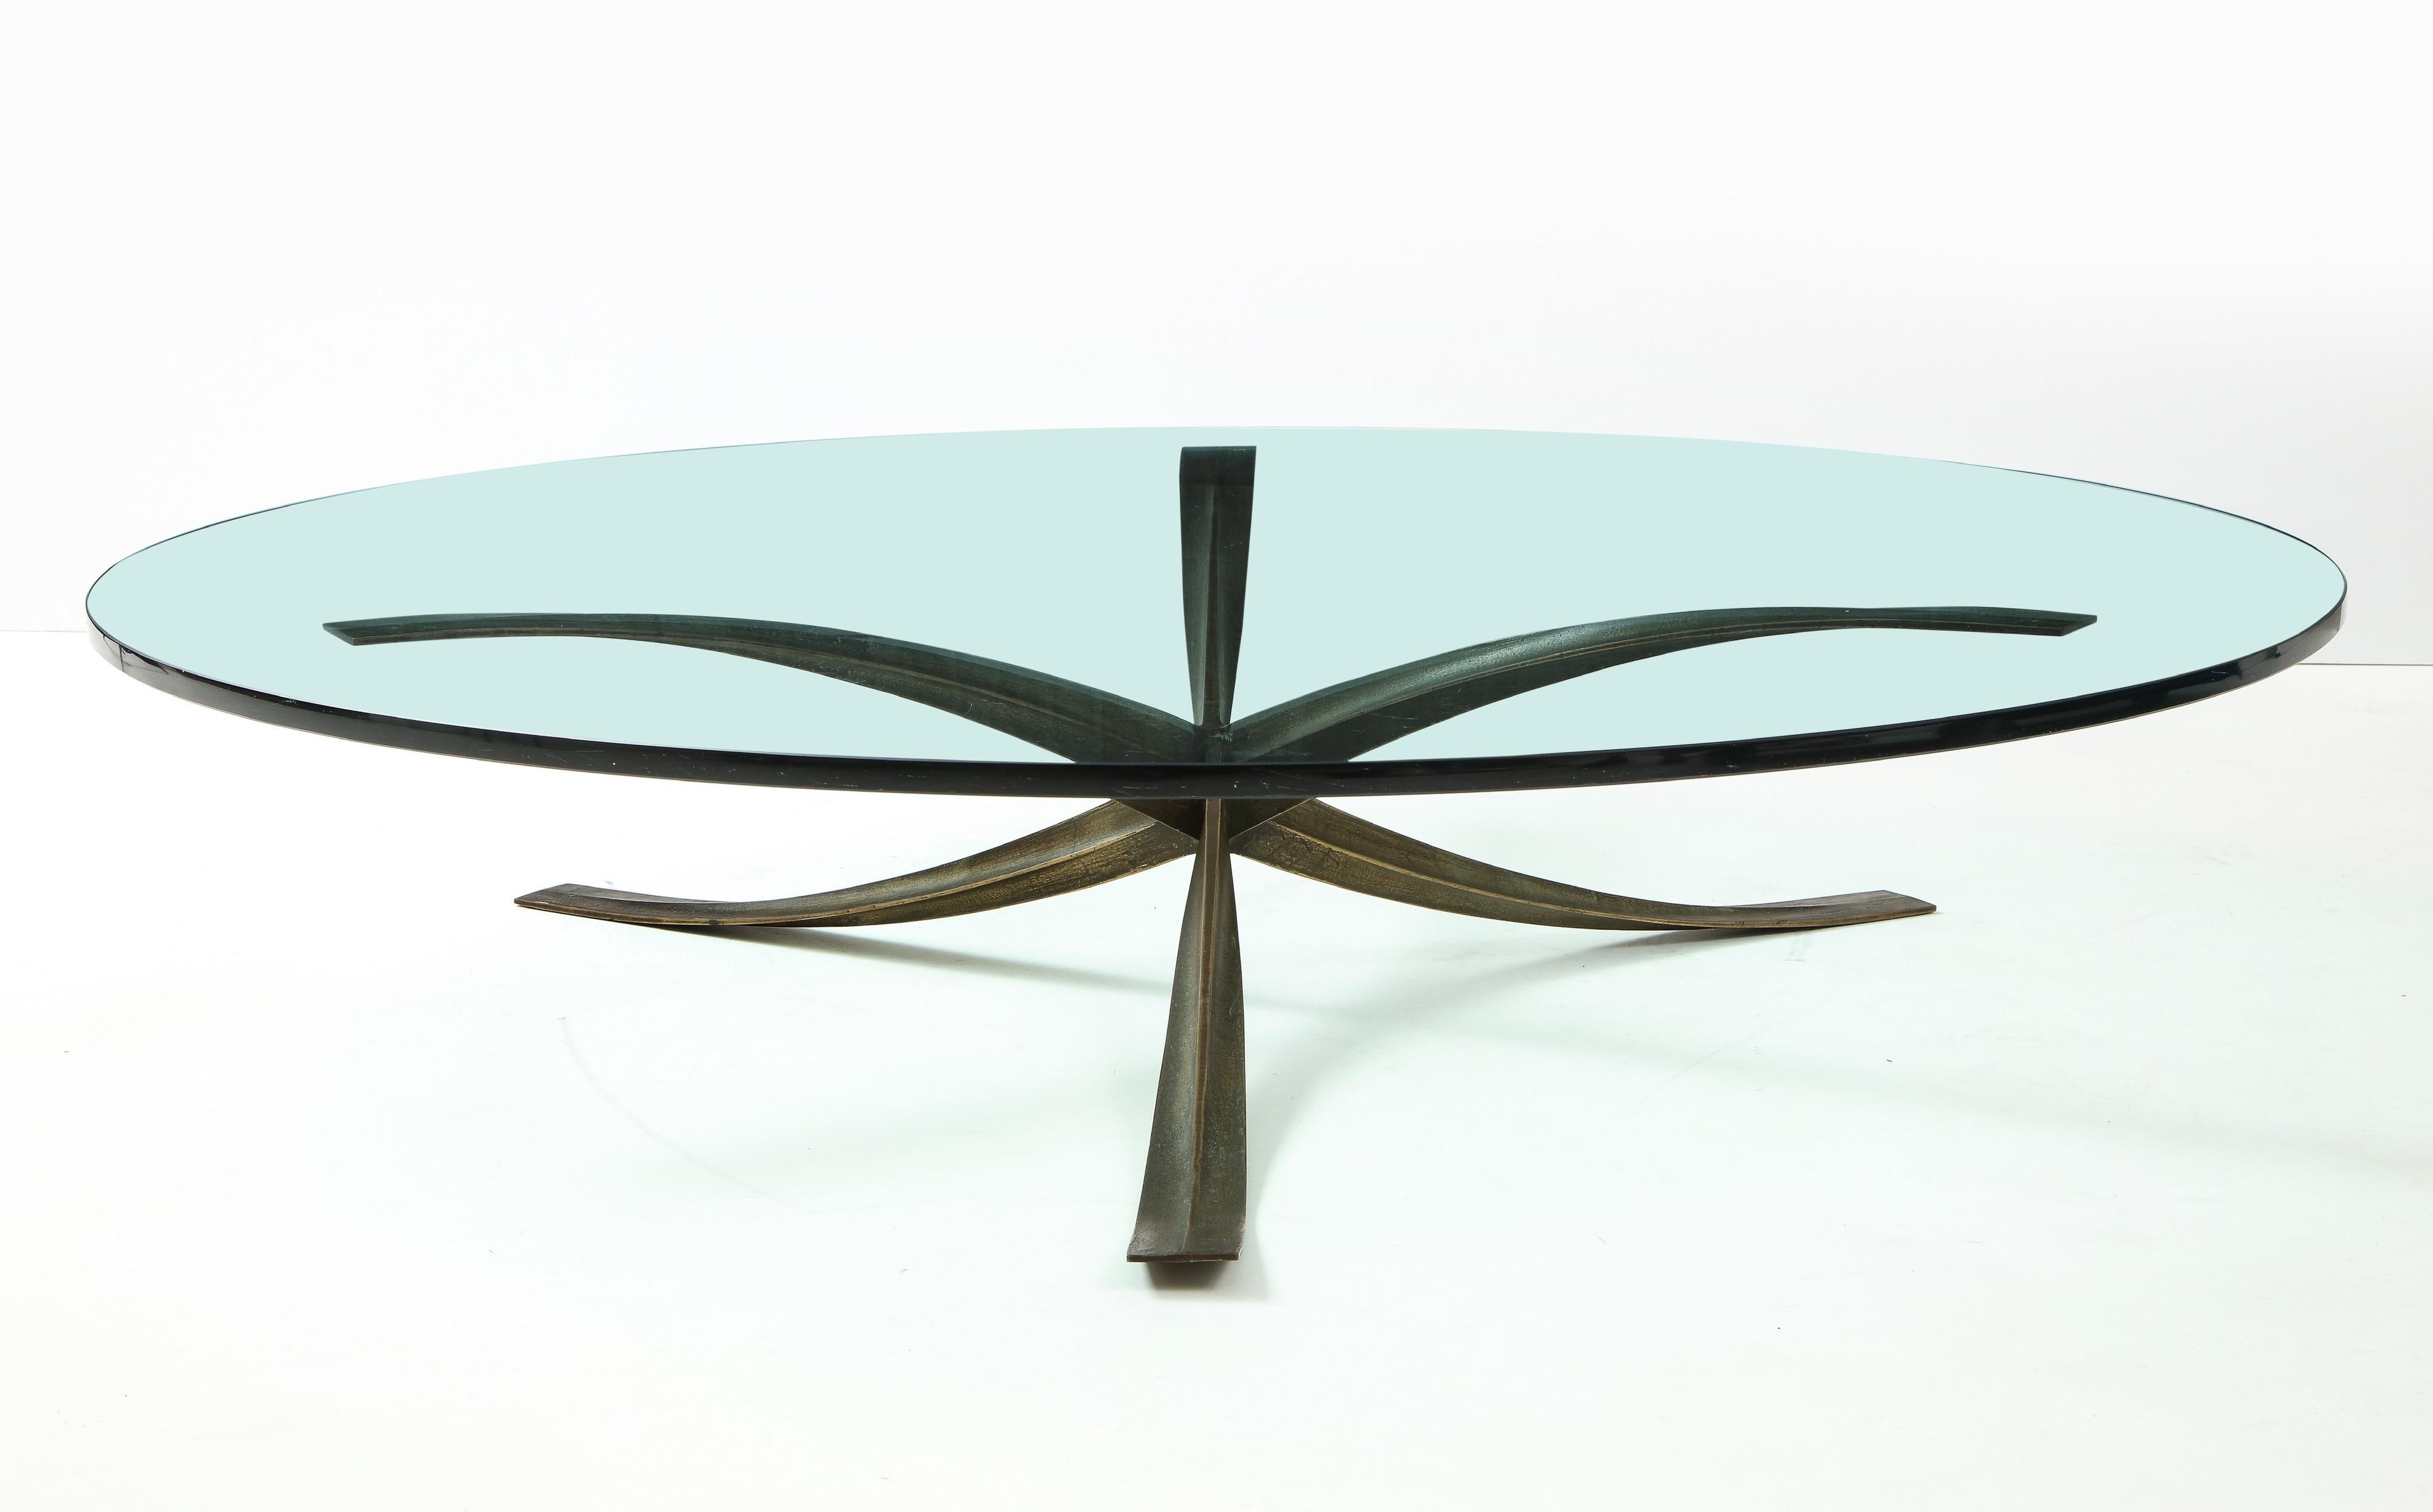 The largest version on Michel Mangematin’s iconic bronze spider table . The base measures 49” wide and 13” high with a 60” thick glass top. Custom made for an American client in 1962.
Biography:
Michel Mangematin was a French designer and architect